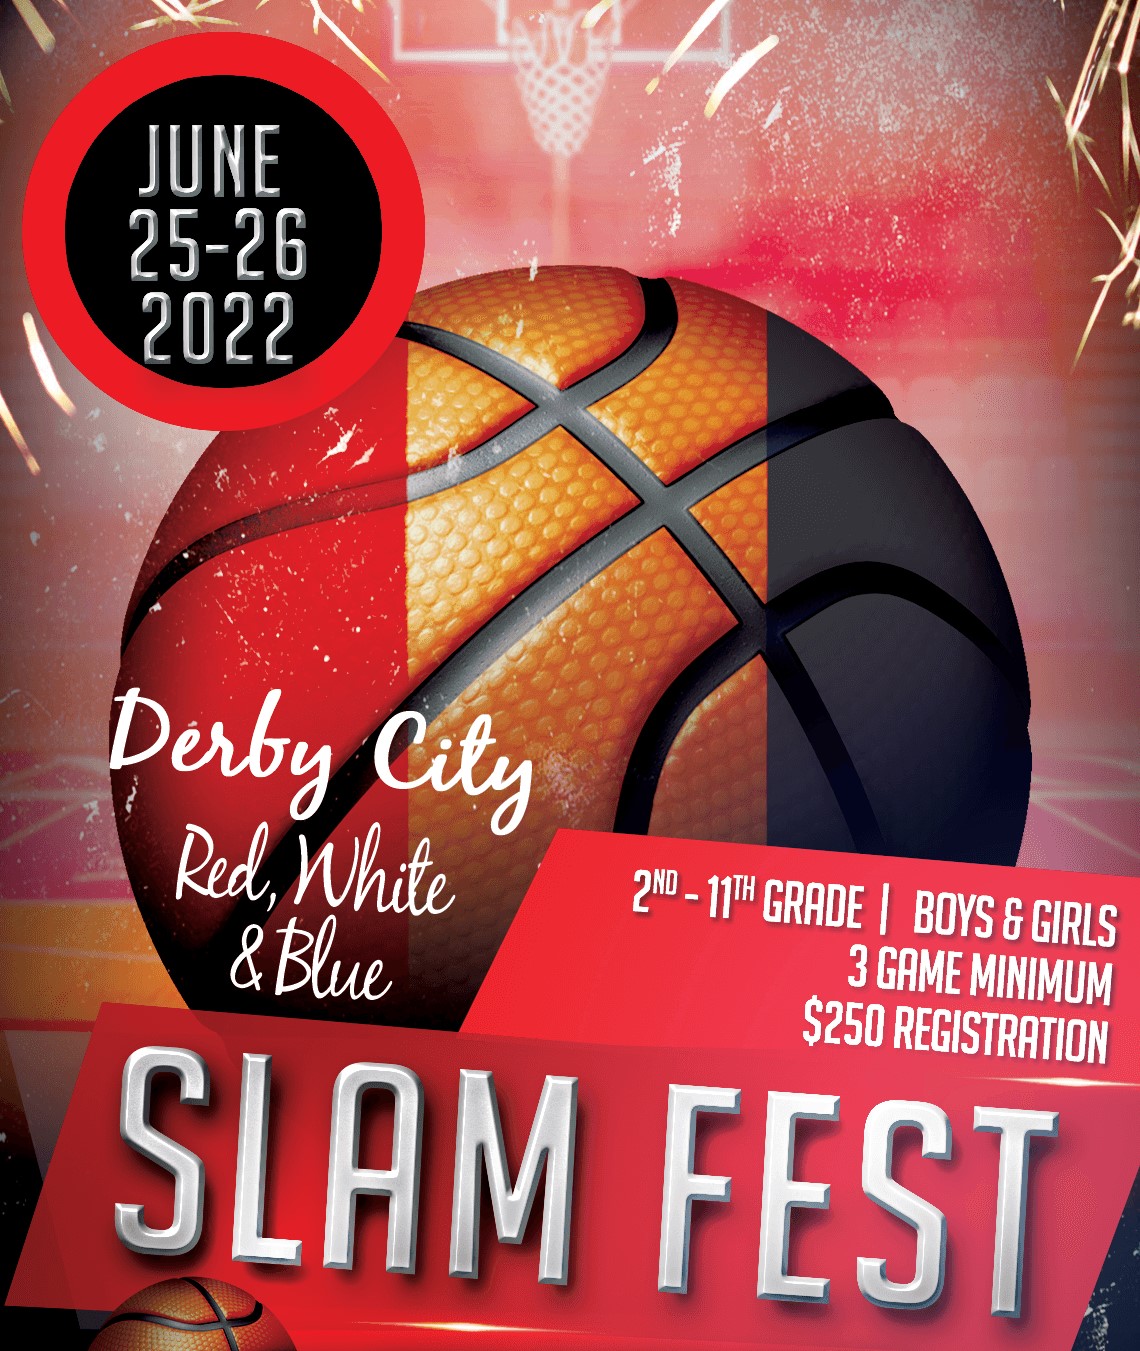 <span style="font-size: 14pt;"><strong><span style="color: #ff0000;">Derby City Red, White & Blue SlamFest</span><br /><span style="color: #000080;">June 25-26, 2022</span> <br /><a href="http://www.midwestbballtournaments.com/ViewEvent.aspx?EID=956"><span style="color: #ff0000;">Click Here for More Info</span> </a></strong></span>